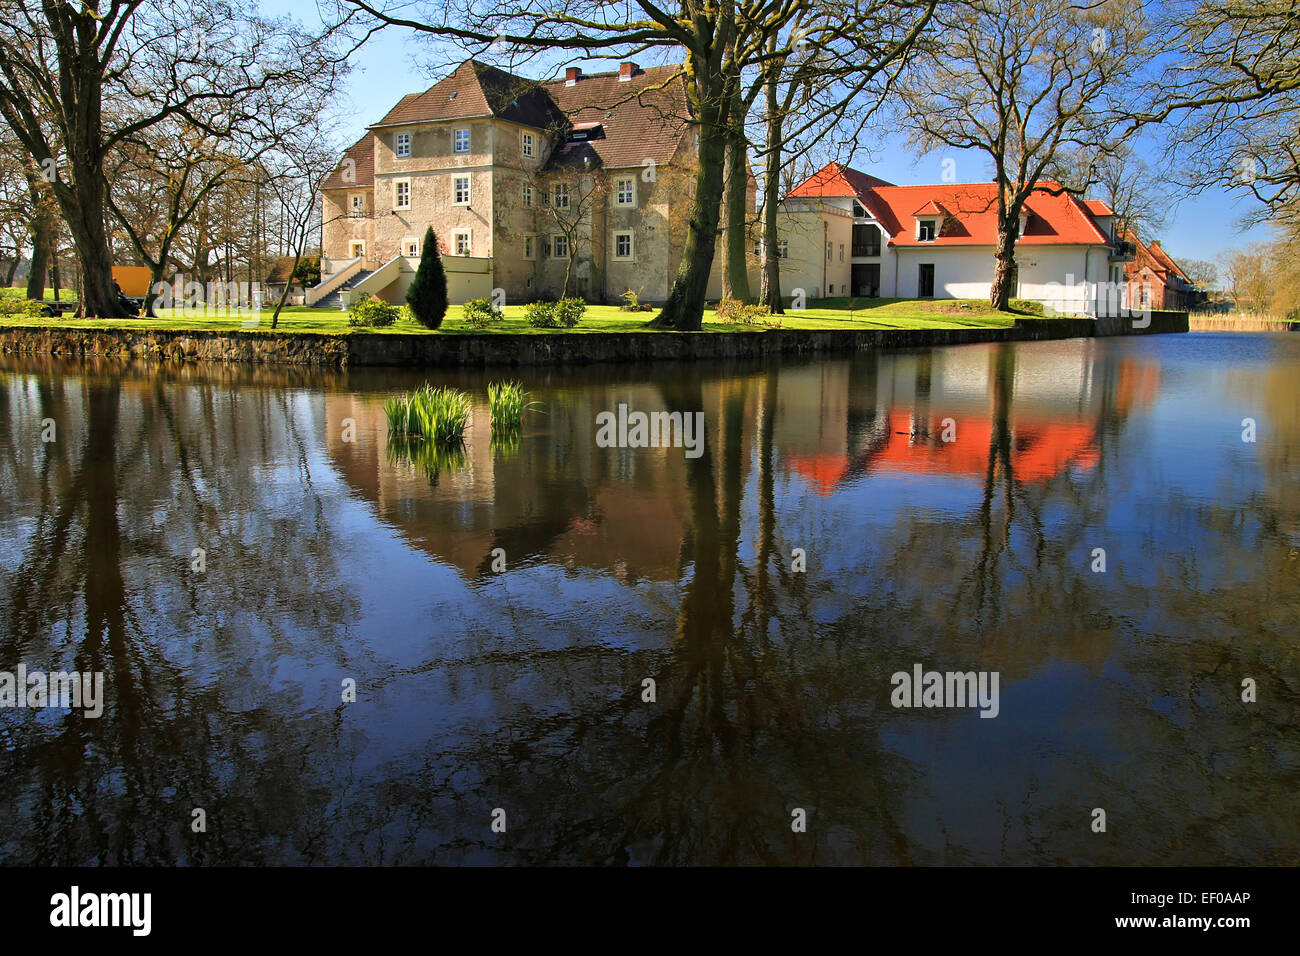 The water castle in Mellenthin. Stock Photo